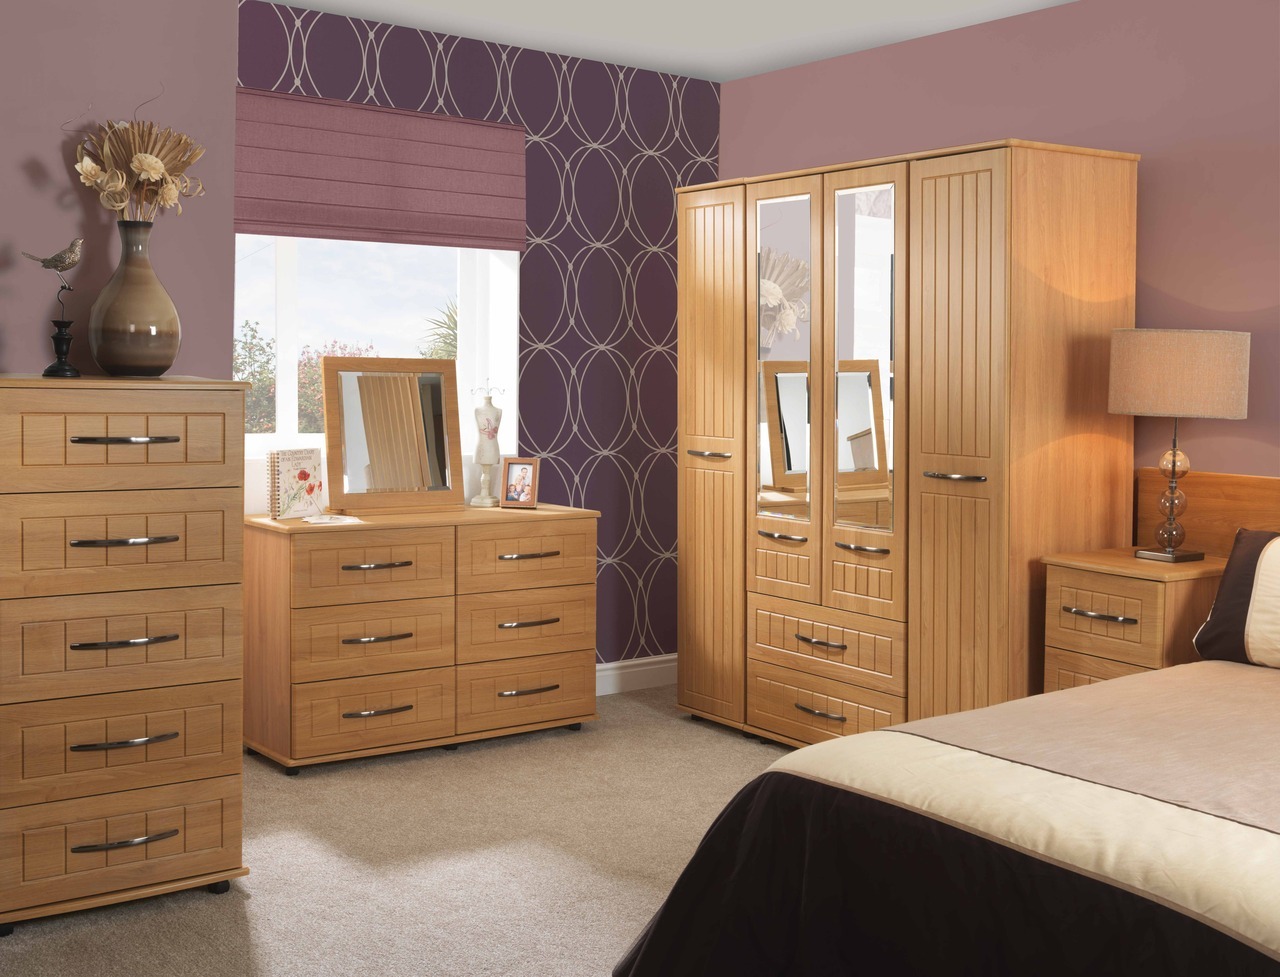 harrison brothers bedroom furniture prices